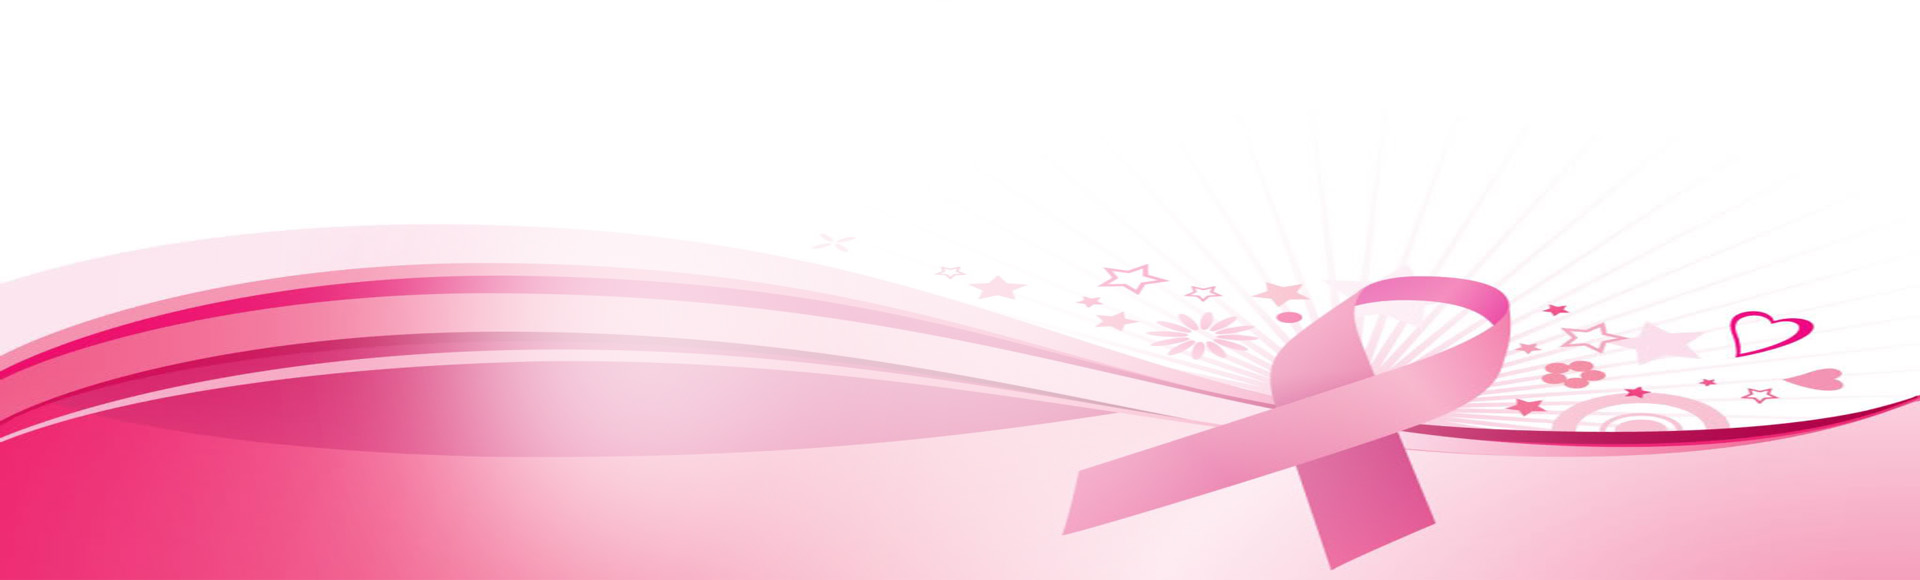 Pin Breast Cancer Fors Presentation Backgrounds for Powerpoint For Breast Cancer Powerpoint Template